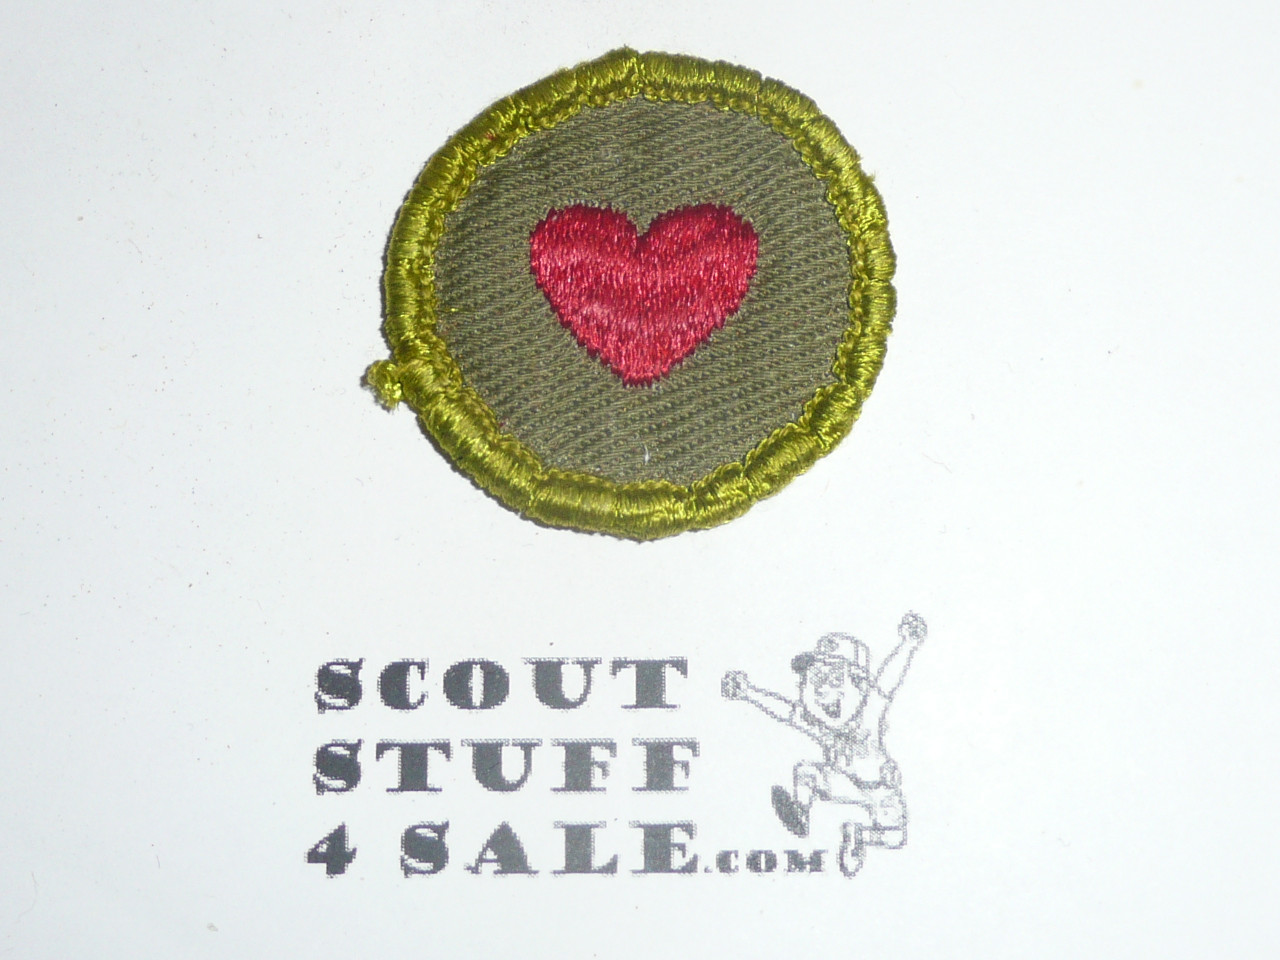 Personal Fitness - Type F - Rolled Edge Twill Merit Badge (1961-1968), sewn